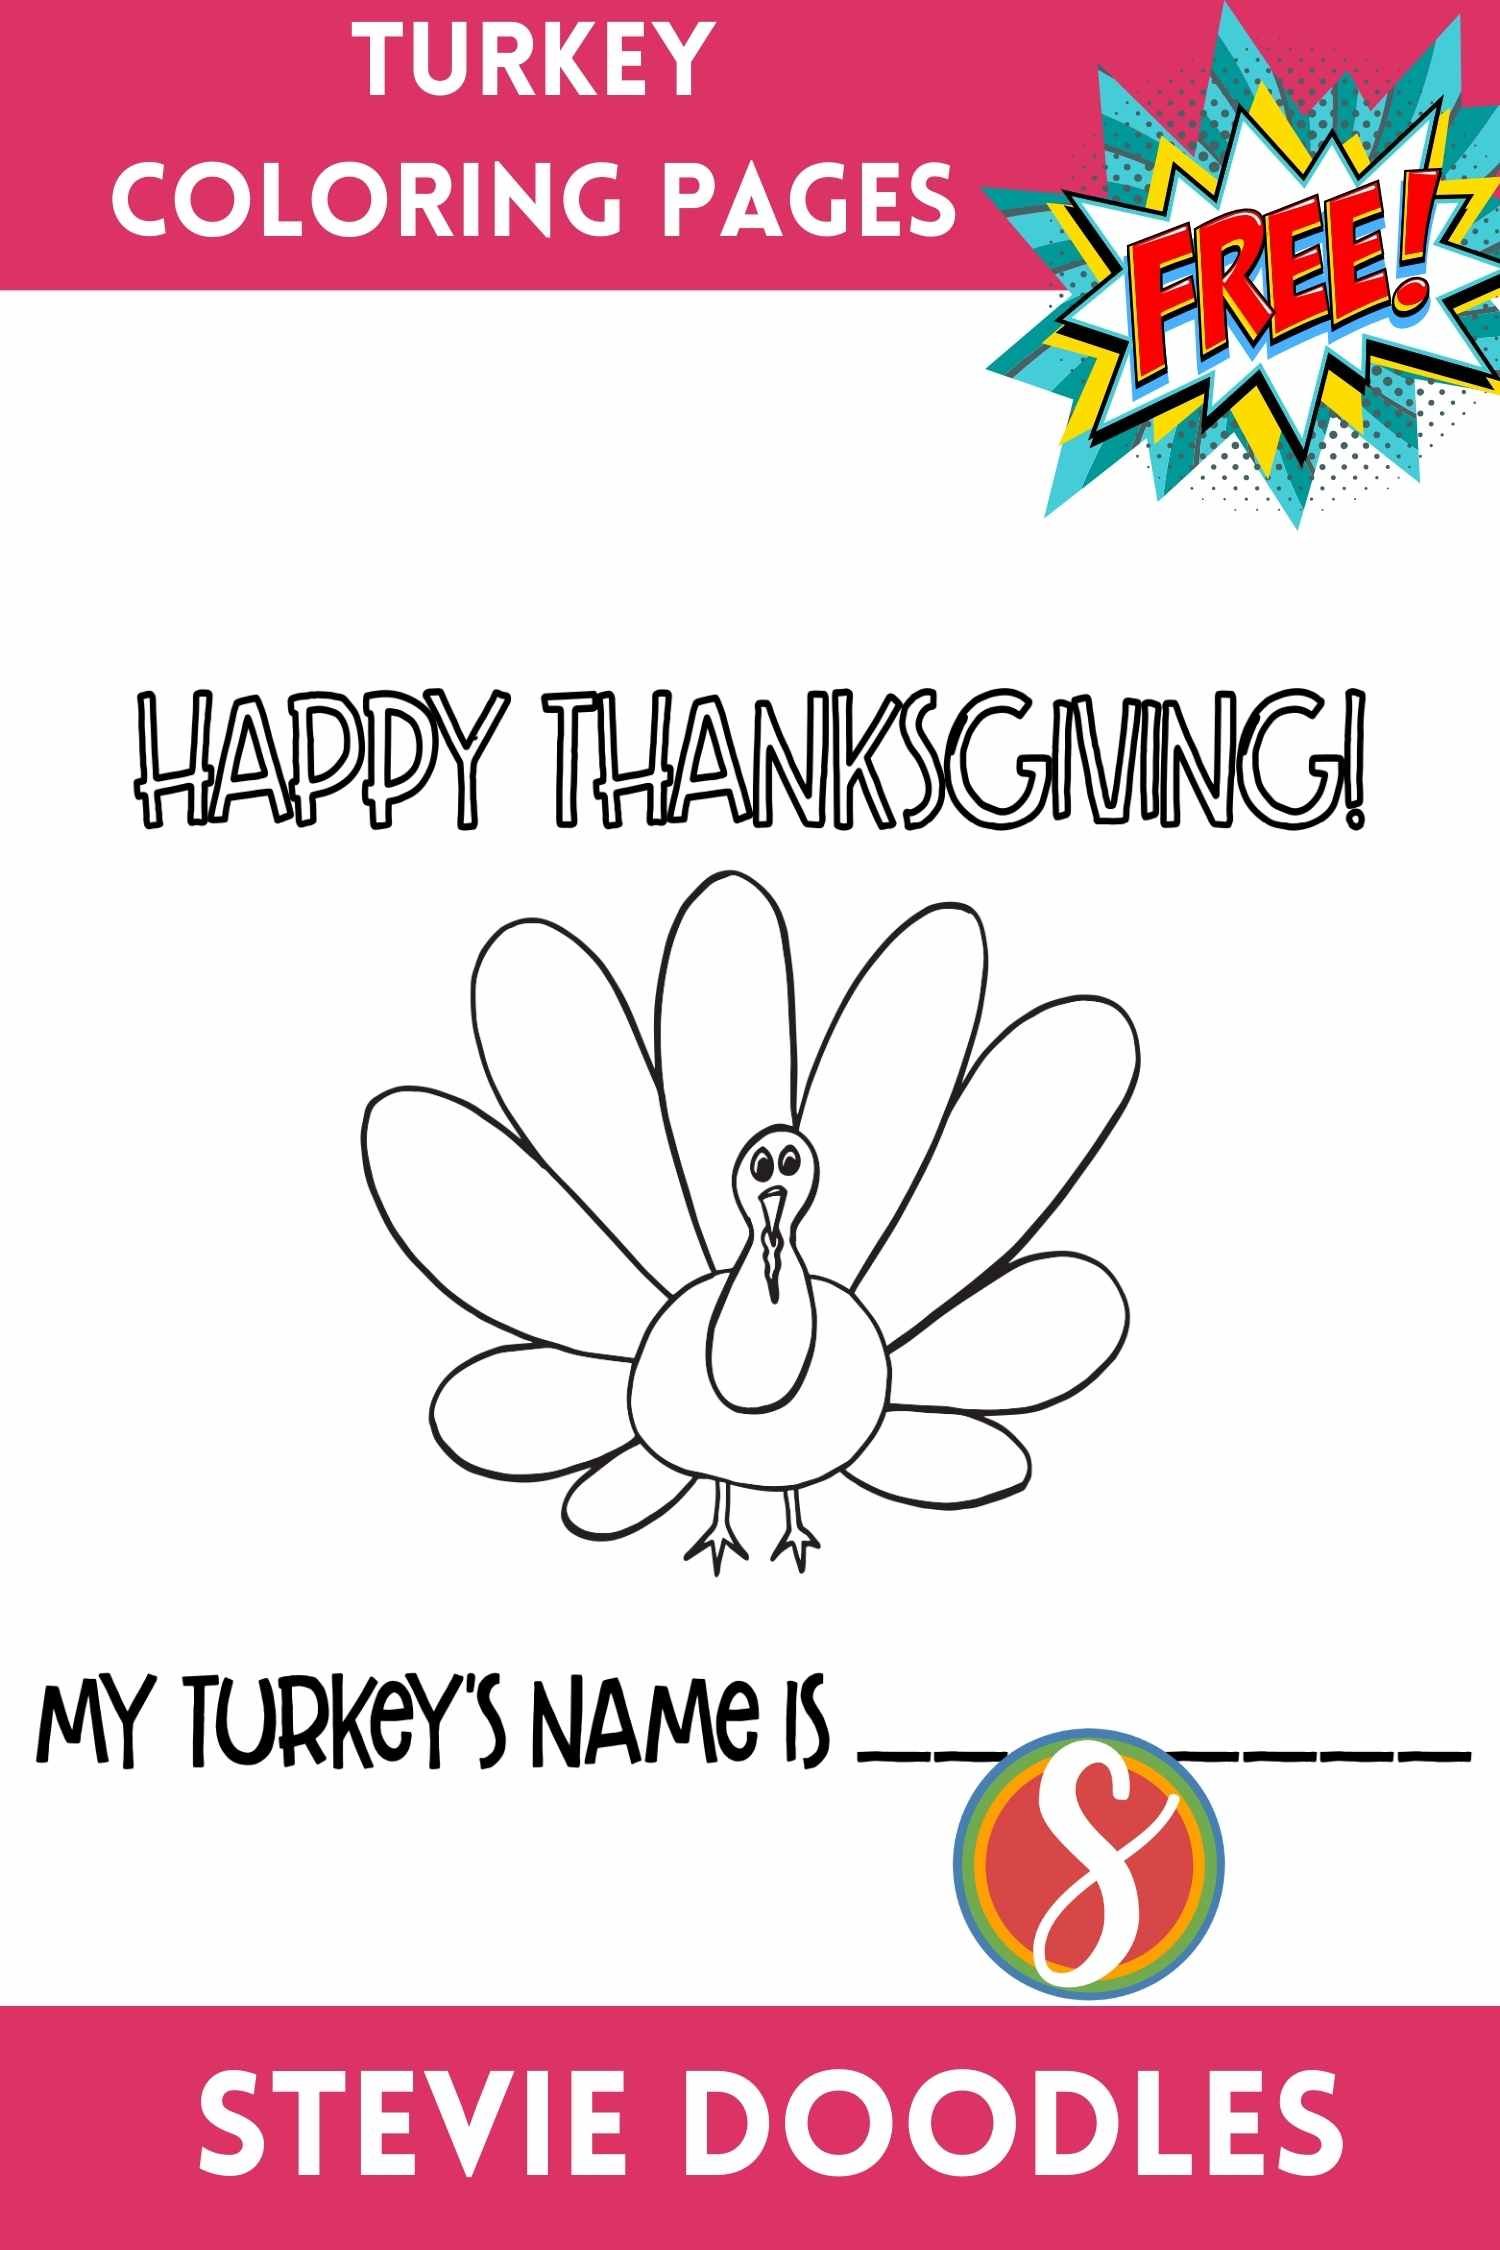 colorable text "happy thanksgiving" above a simple turkey drawing, above text "My turkey's name is ________"